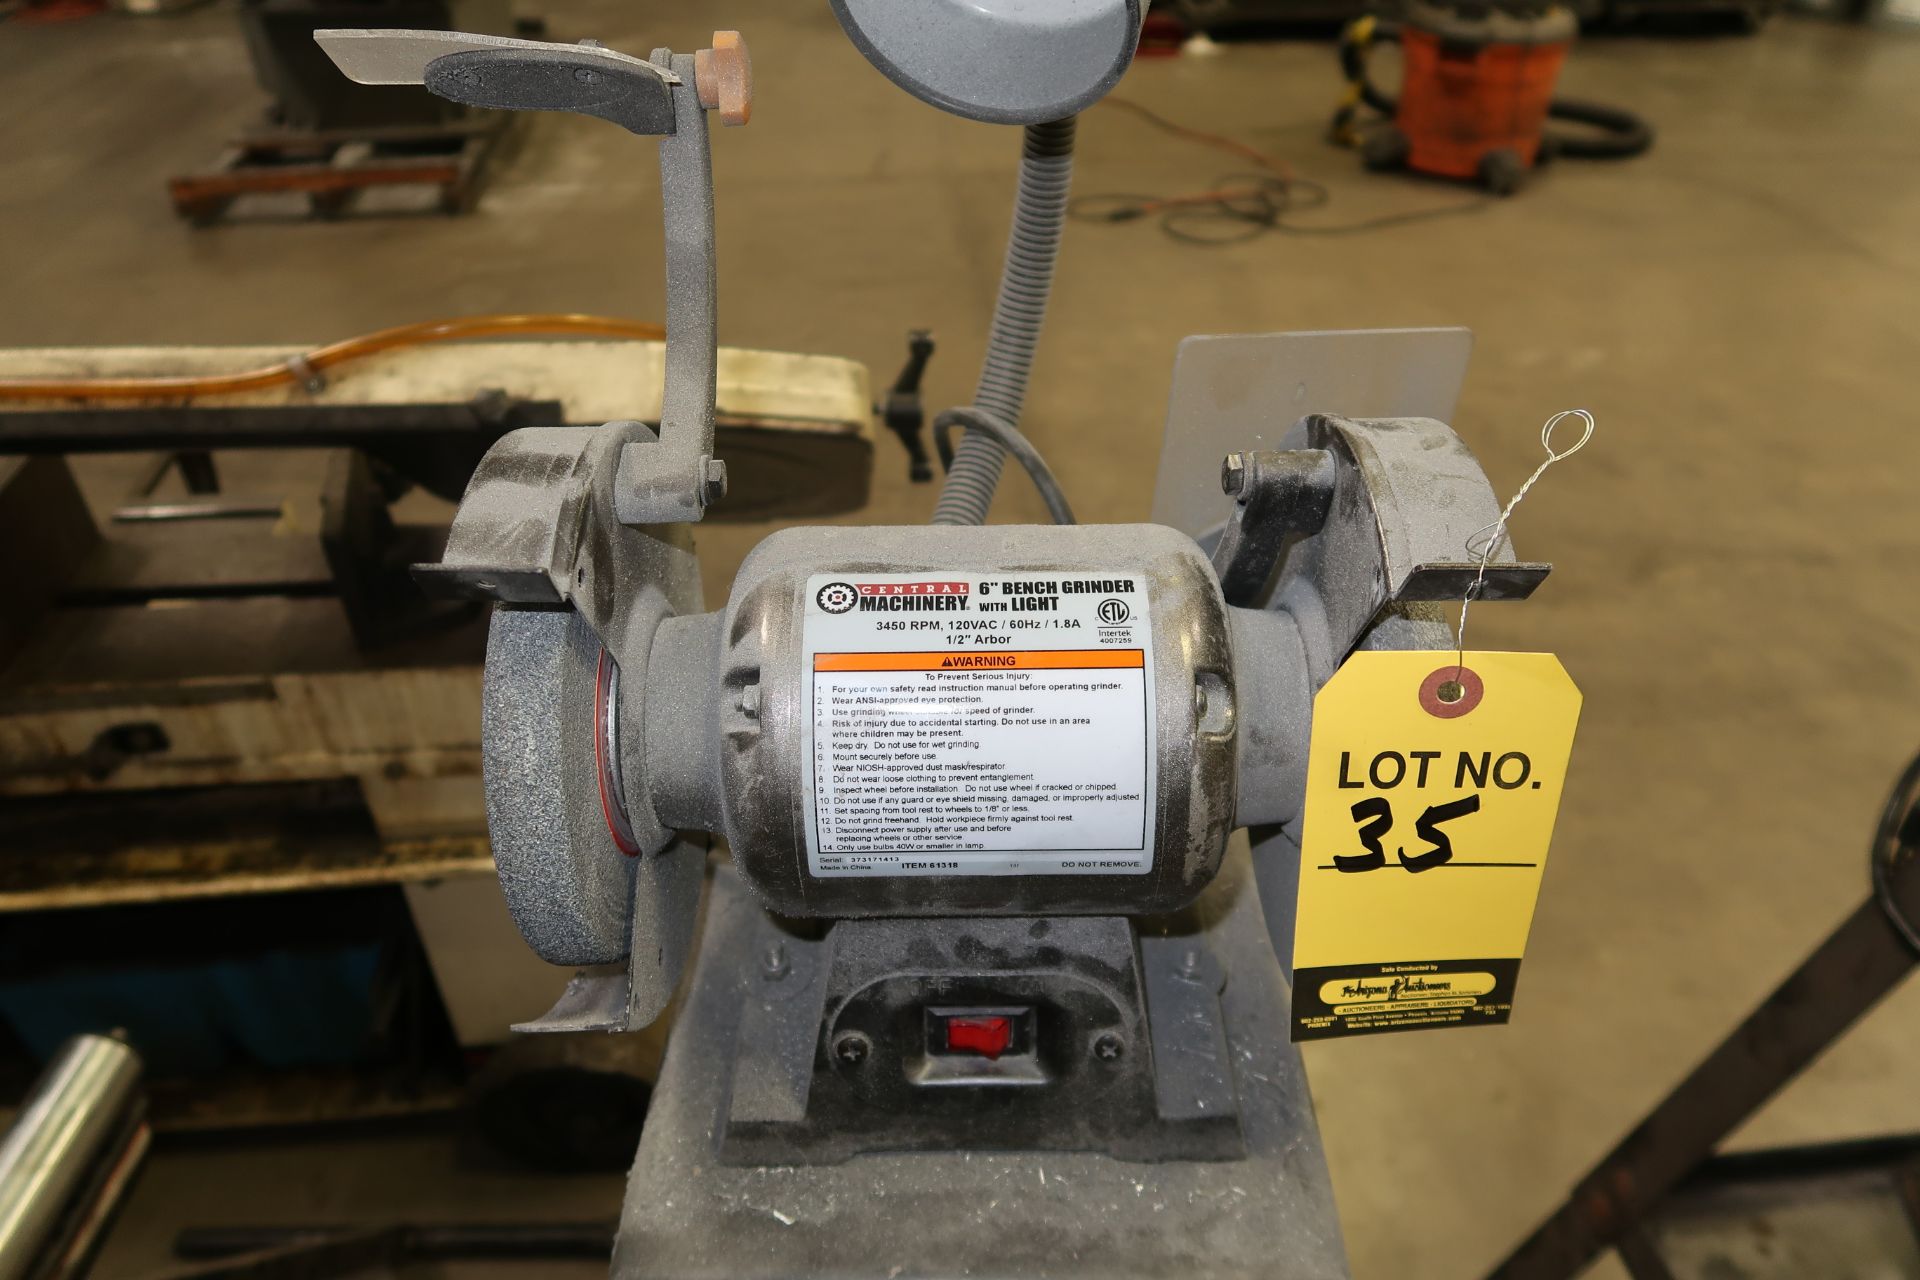 CENTRAL MACHINERY 6" BENCH GRINDER